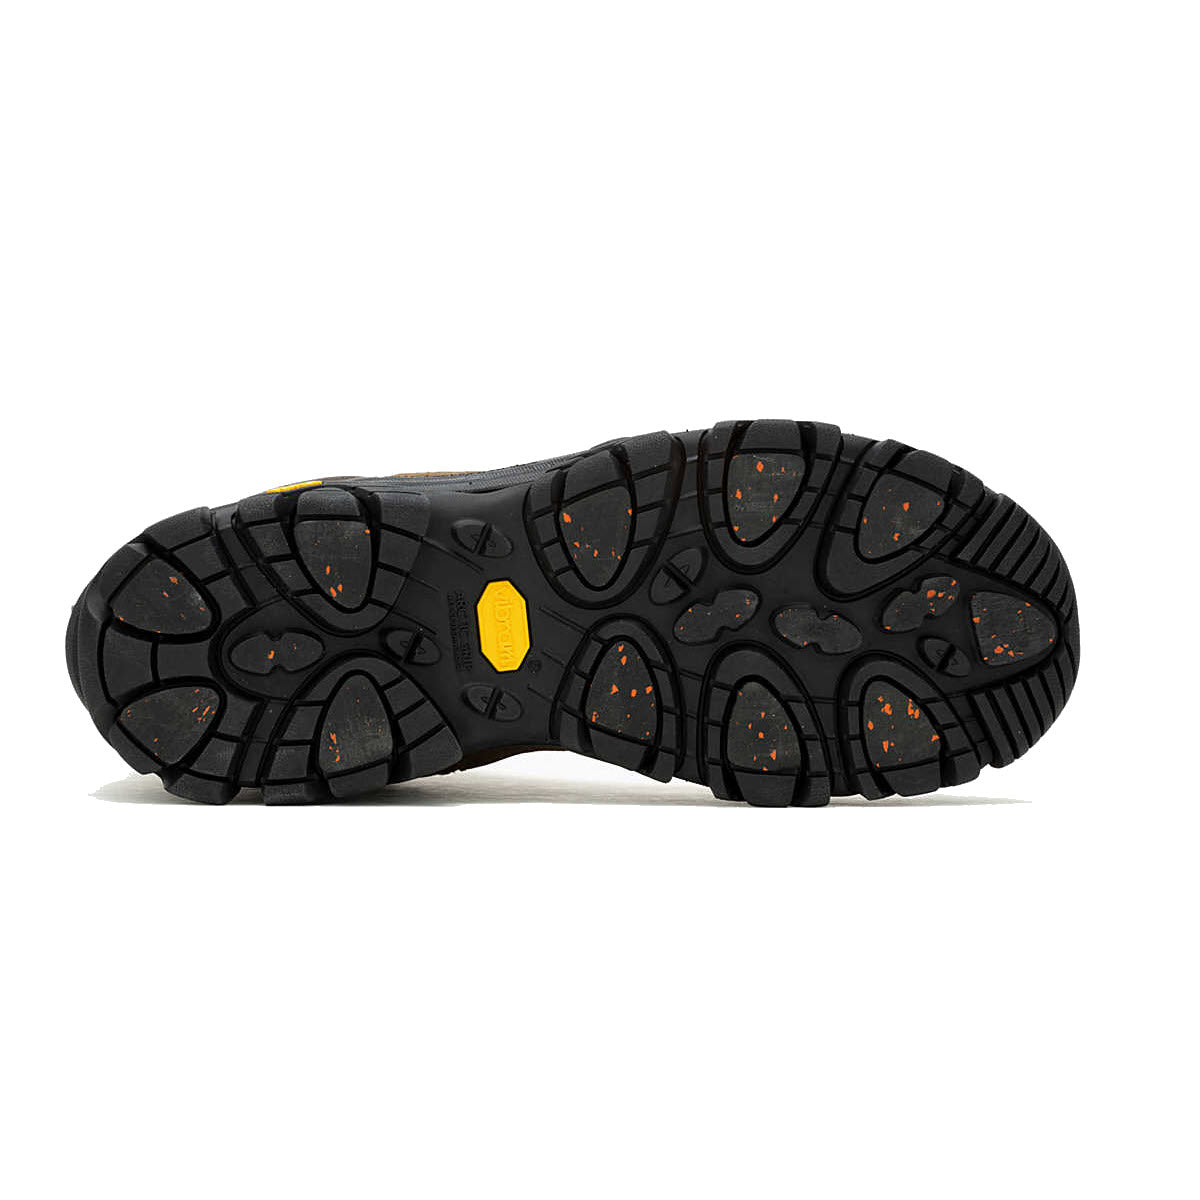 Bottom view of a Merrell Coldpack 3 Thermo Tall Zip WP Earth - Mens winter boot sole with black and gray tread pattern and scattered orange specks, featuring a yellow rectangular logo.